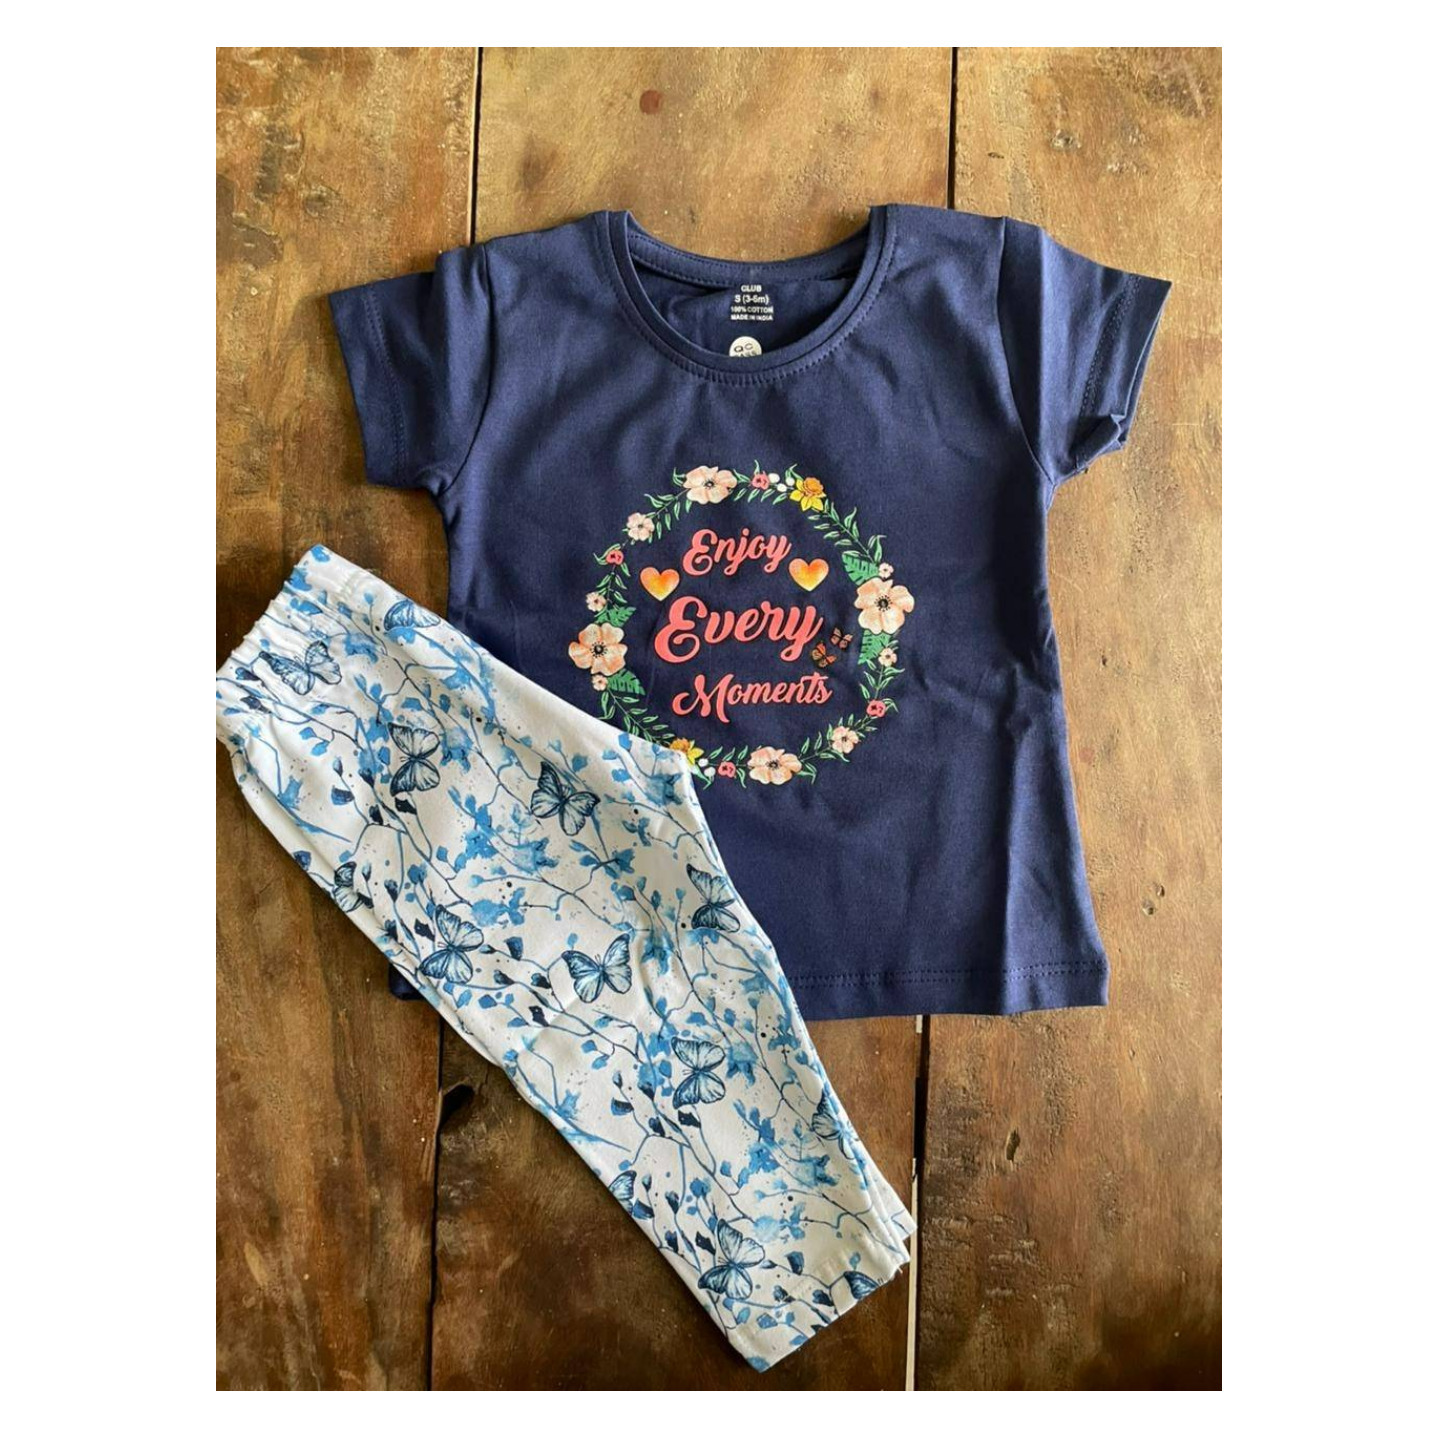 Cucumber Club Half Sleeves Top & Leggings Rs 330 Only Made In India 0 to 12 Months Size